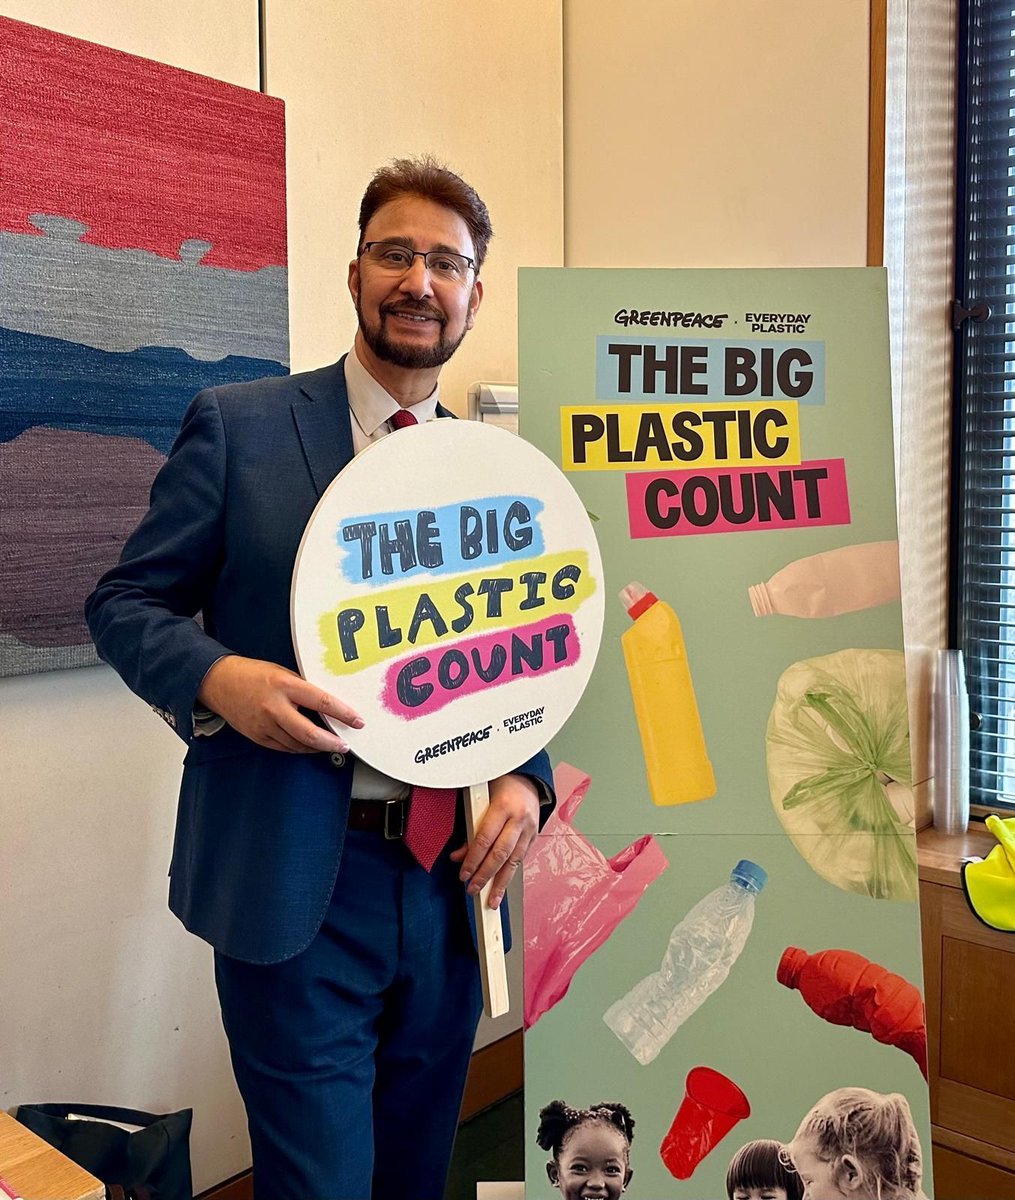 In the UK, we throw away 1.7 billion pieces of plastic packaging every week. I proudly support a strong #GlobalPlasticsTreaty that would see cuts to plastic production by at least 75% by 2040.